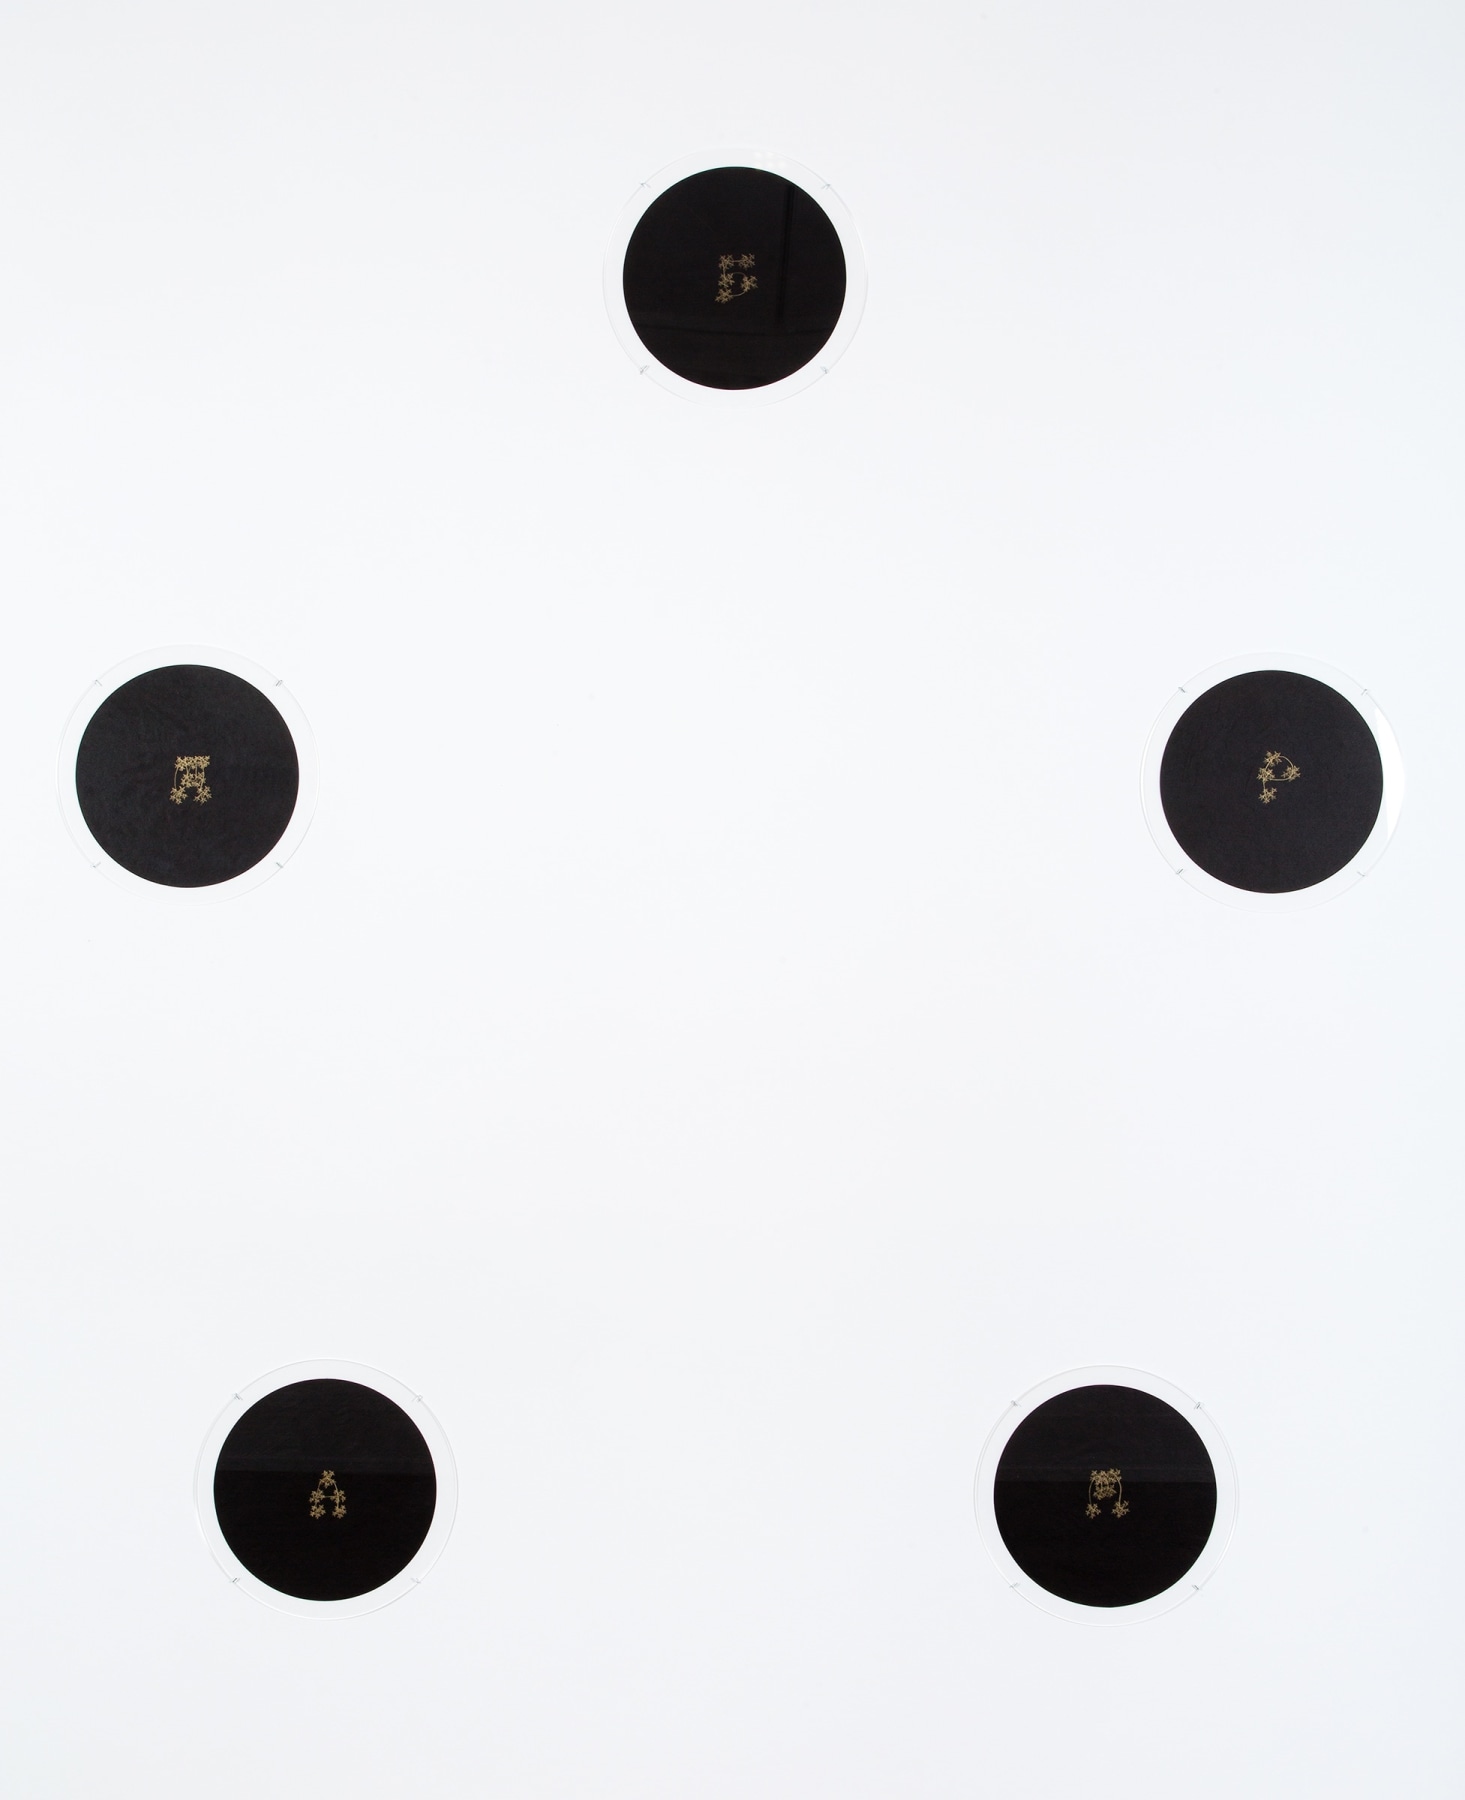 James Lee Byars

&amp;ldquo;5 Points Makes a Man&amp;rdquo;, 1993

Gold pencil on Japanese paper

Five parts, each:

11 3/4 x 11 3/4 inches

30 x 30 cm

JBZ 193